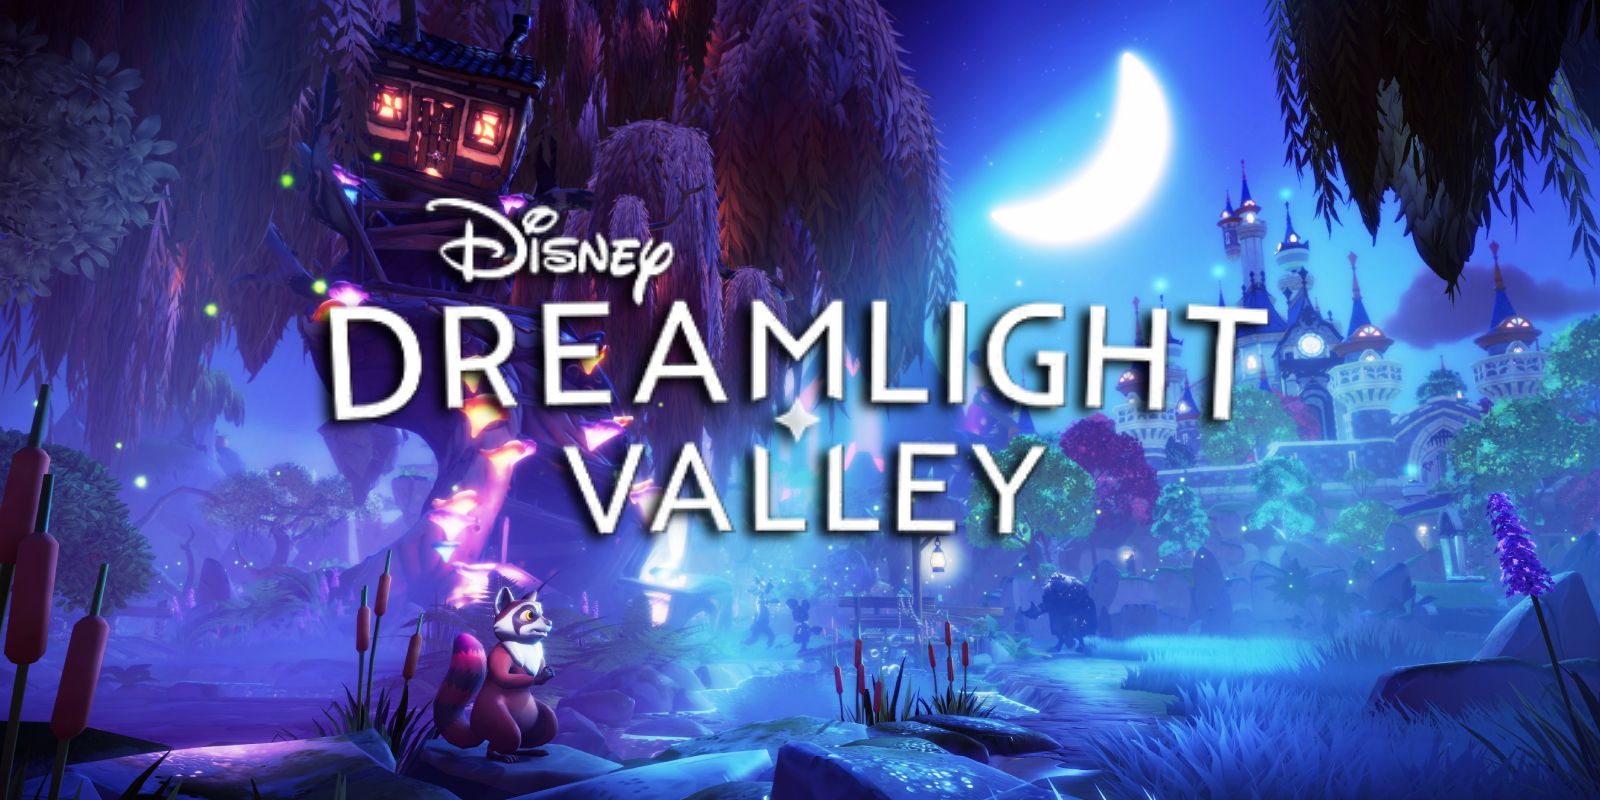 Disney Dreamlight Valley's title card, showing the titular locale in the background.